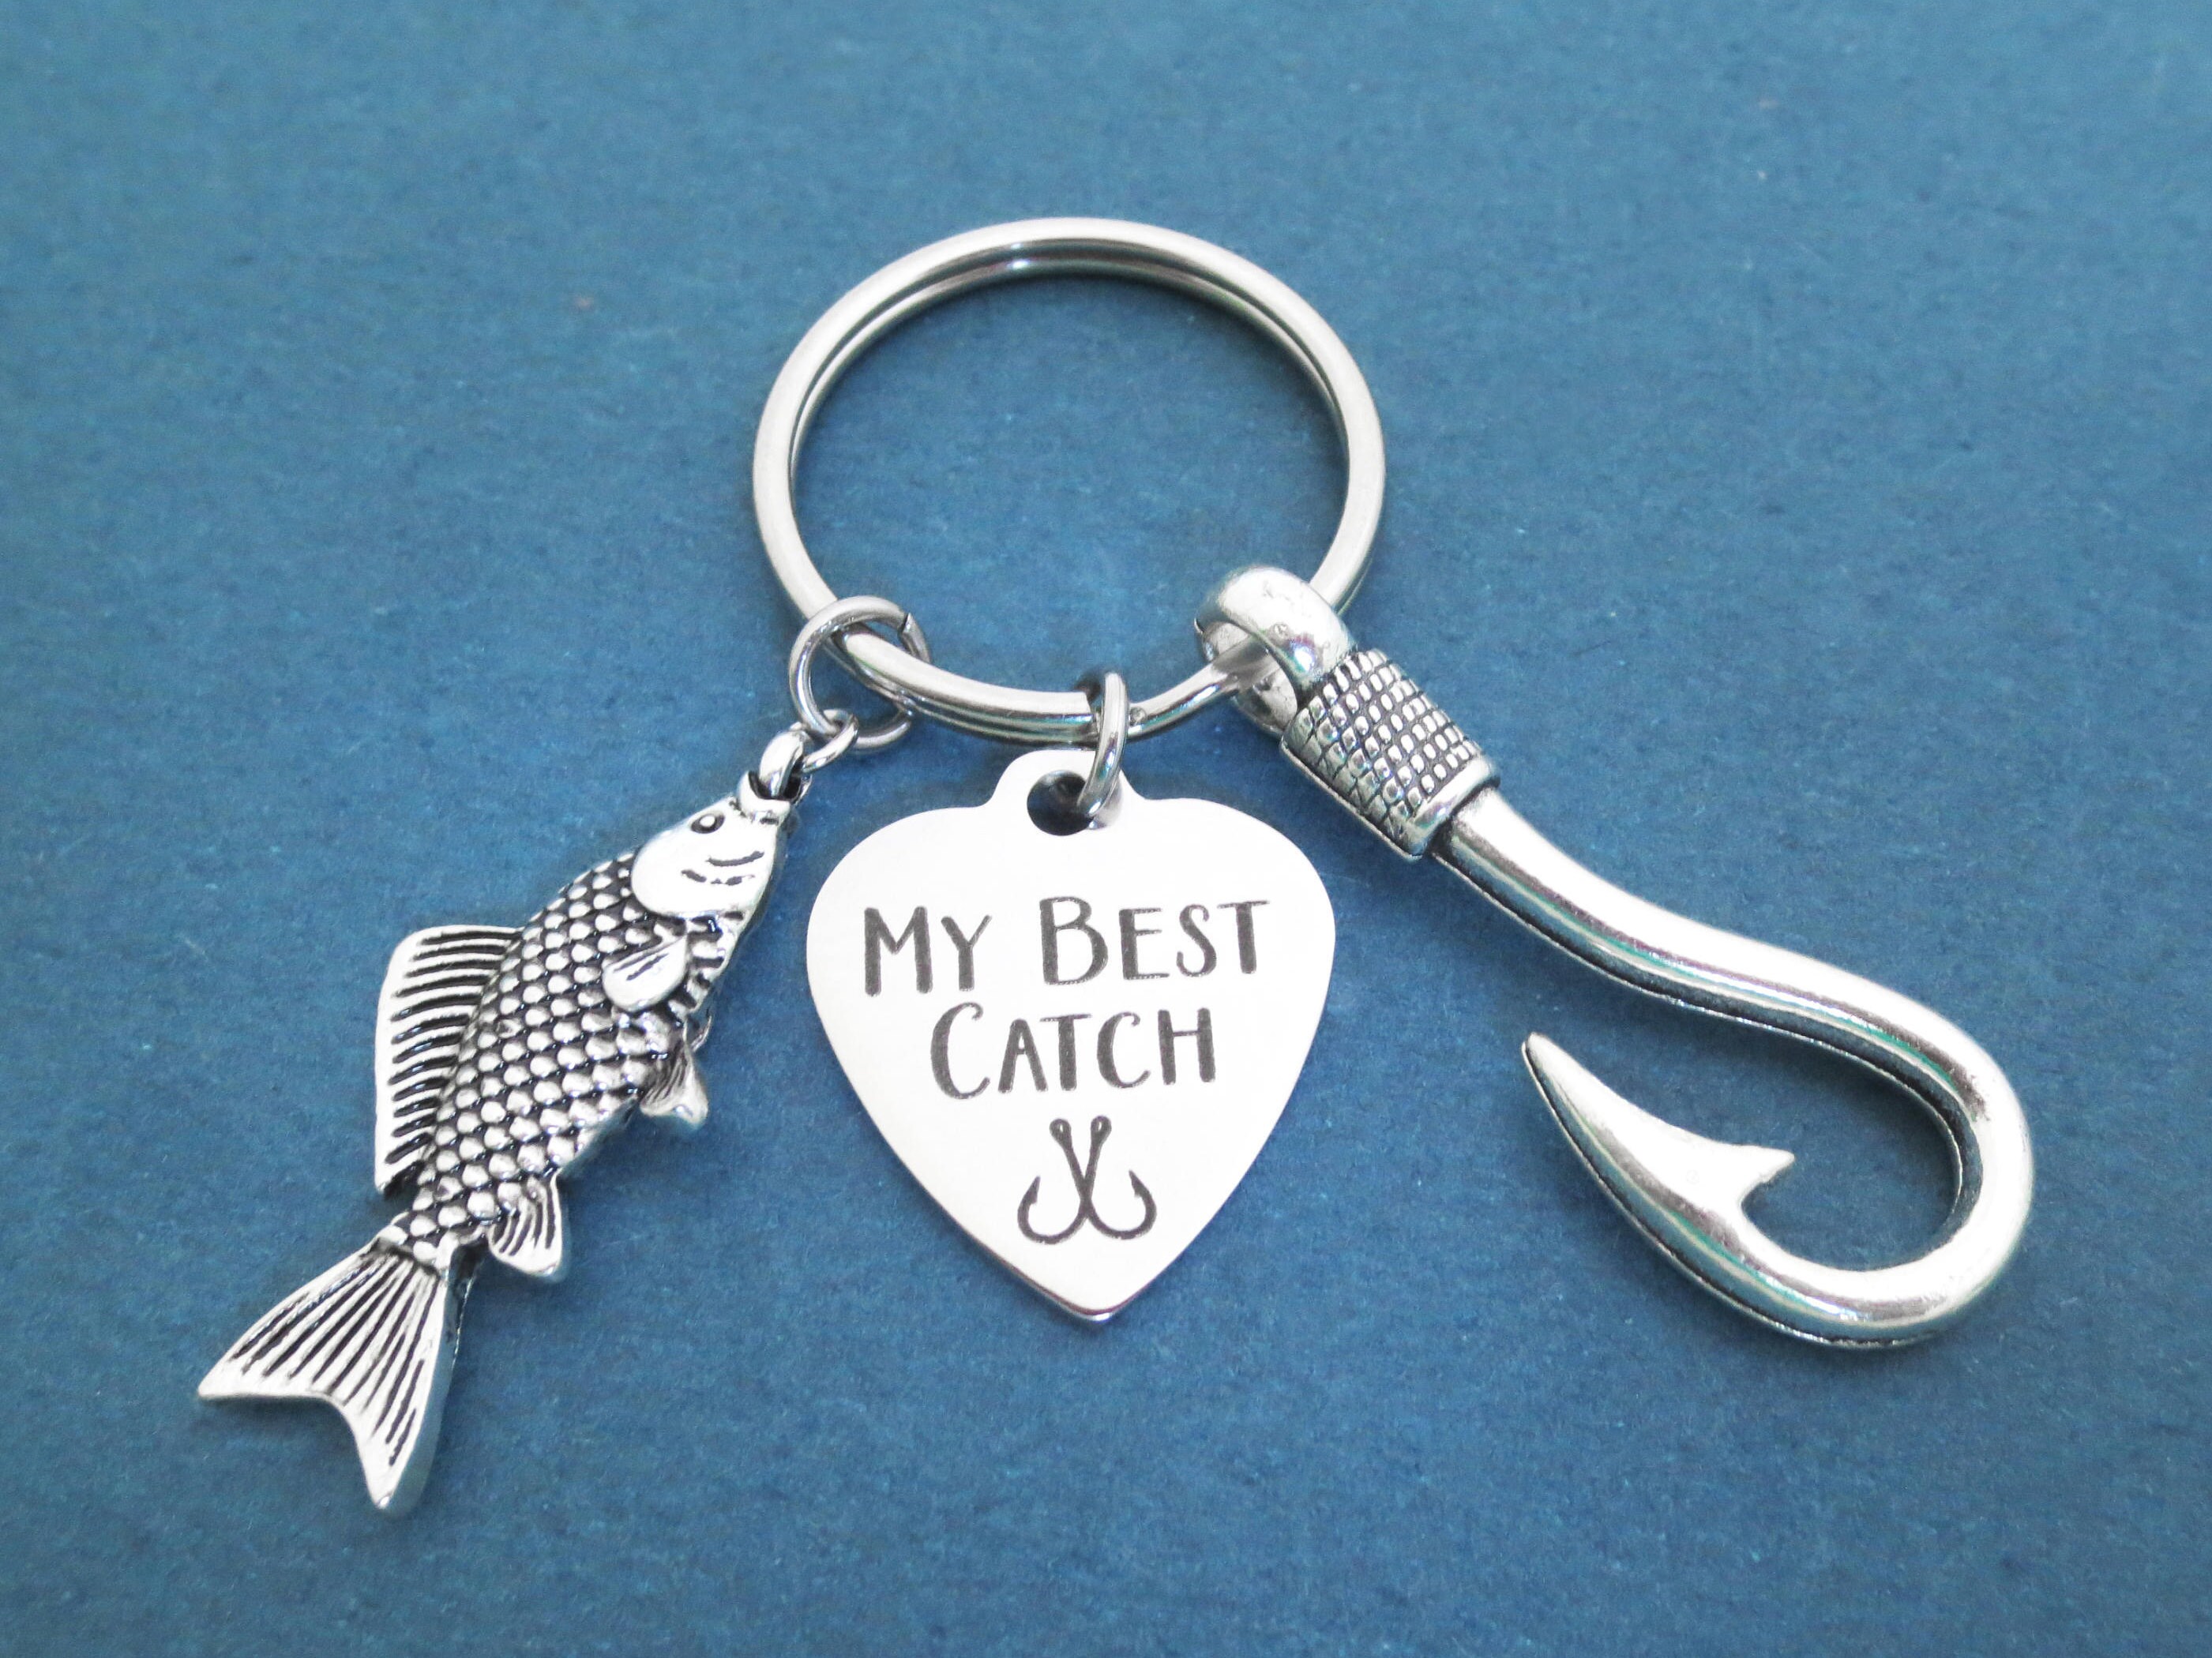 Buy Best Catch Keyring Online In India -  India